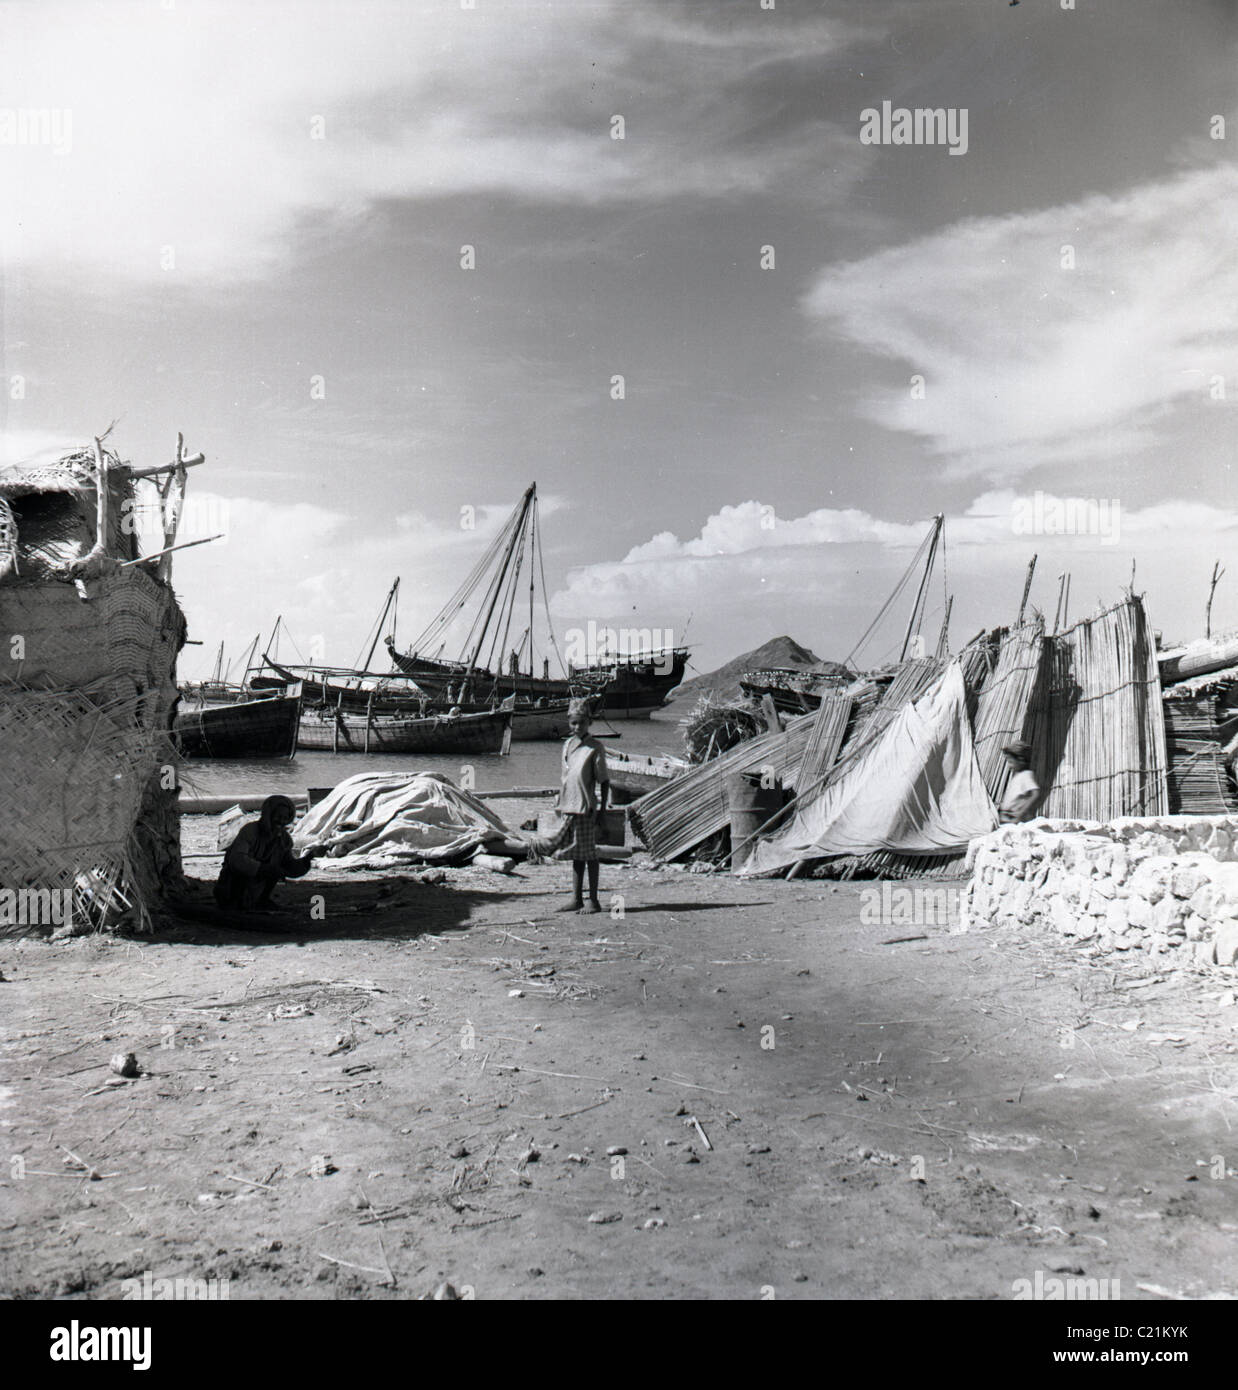 The old harbour, Aden, Yemen in this historical picture from the 1950s. Stock Photo